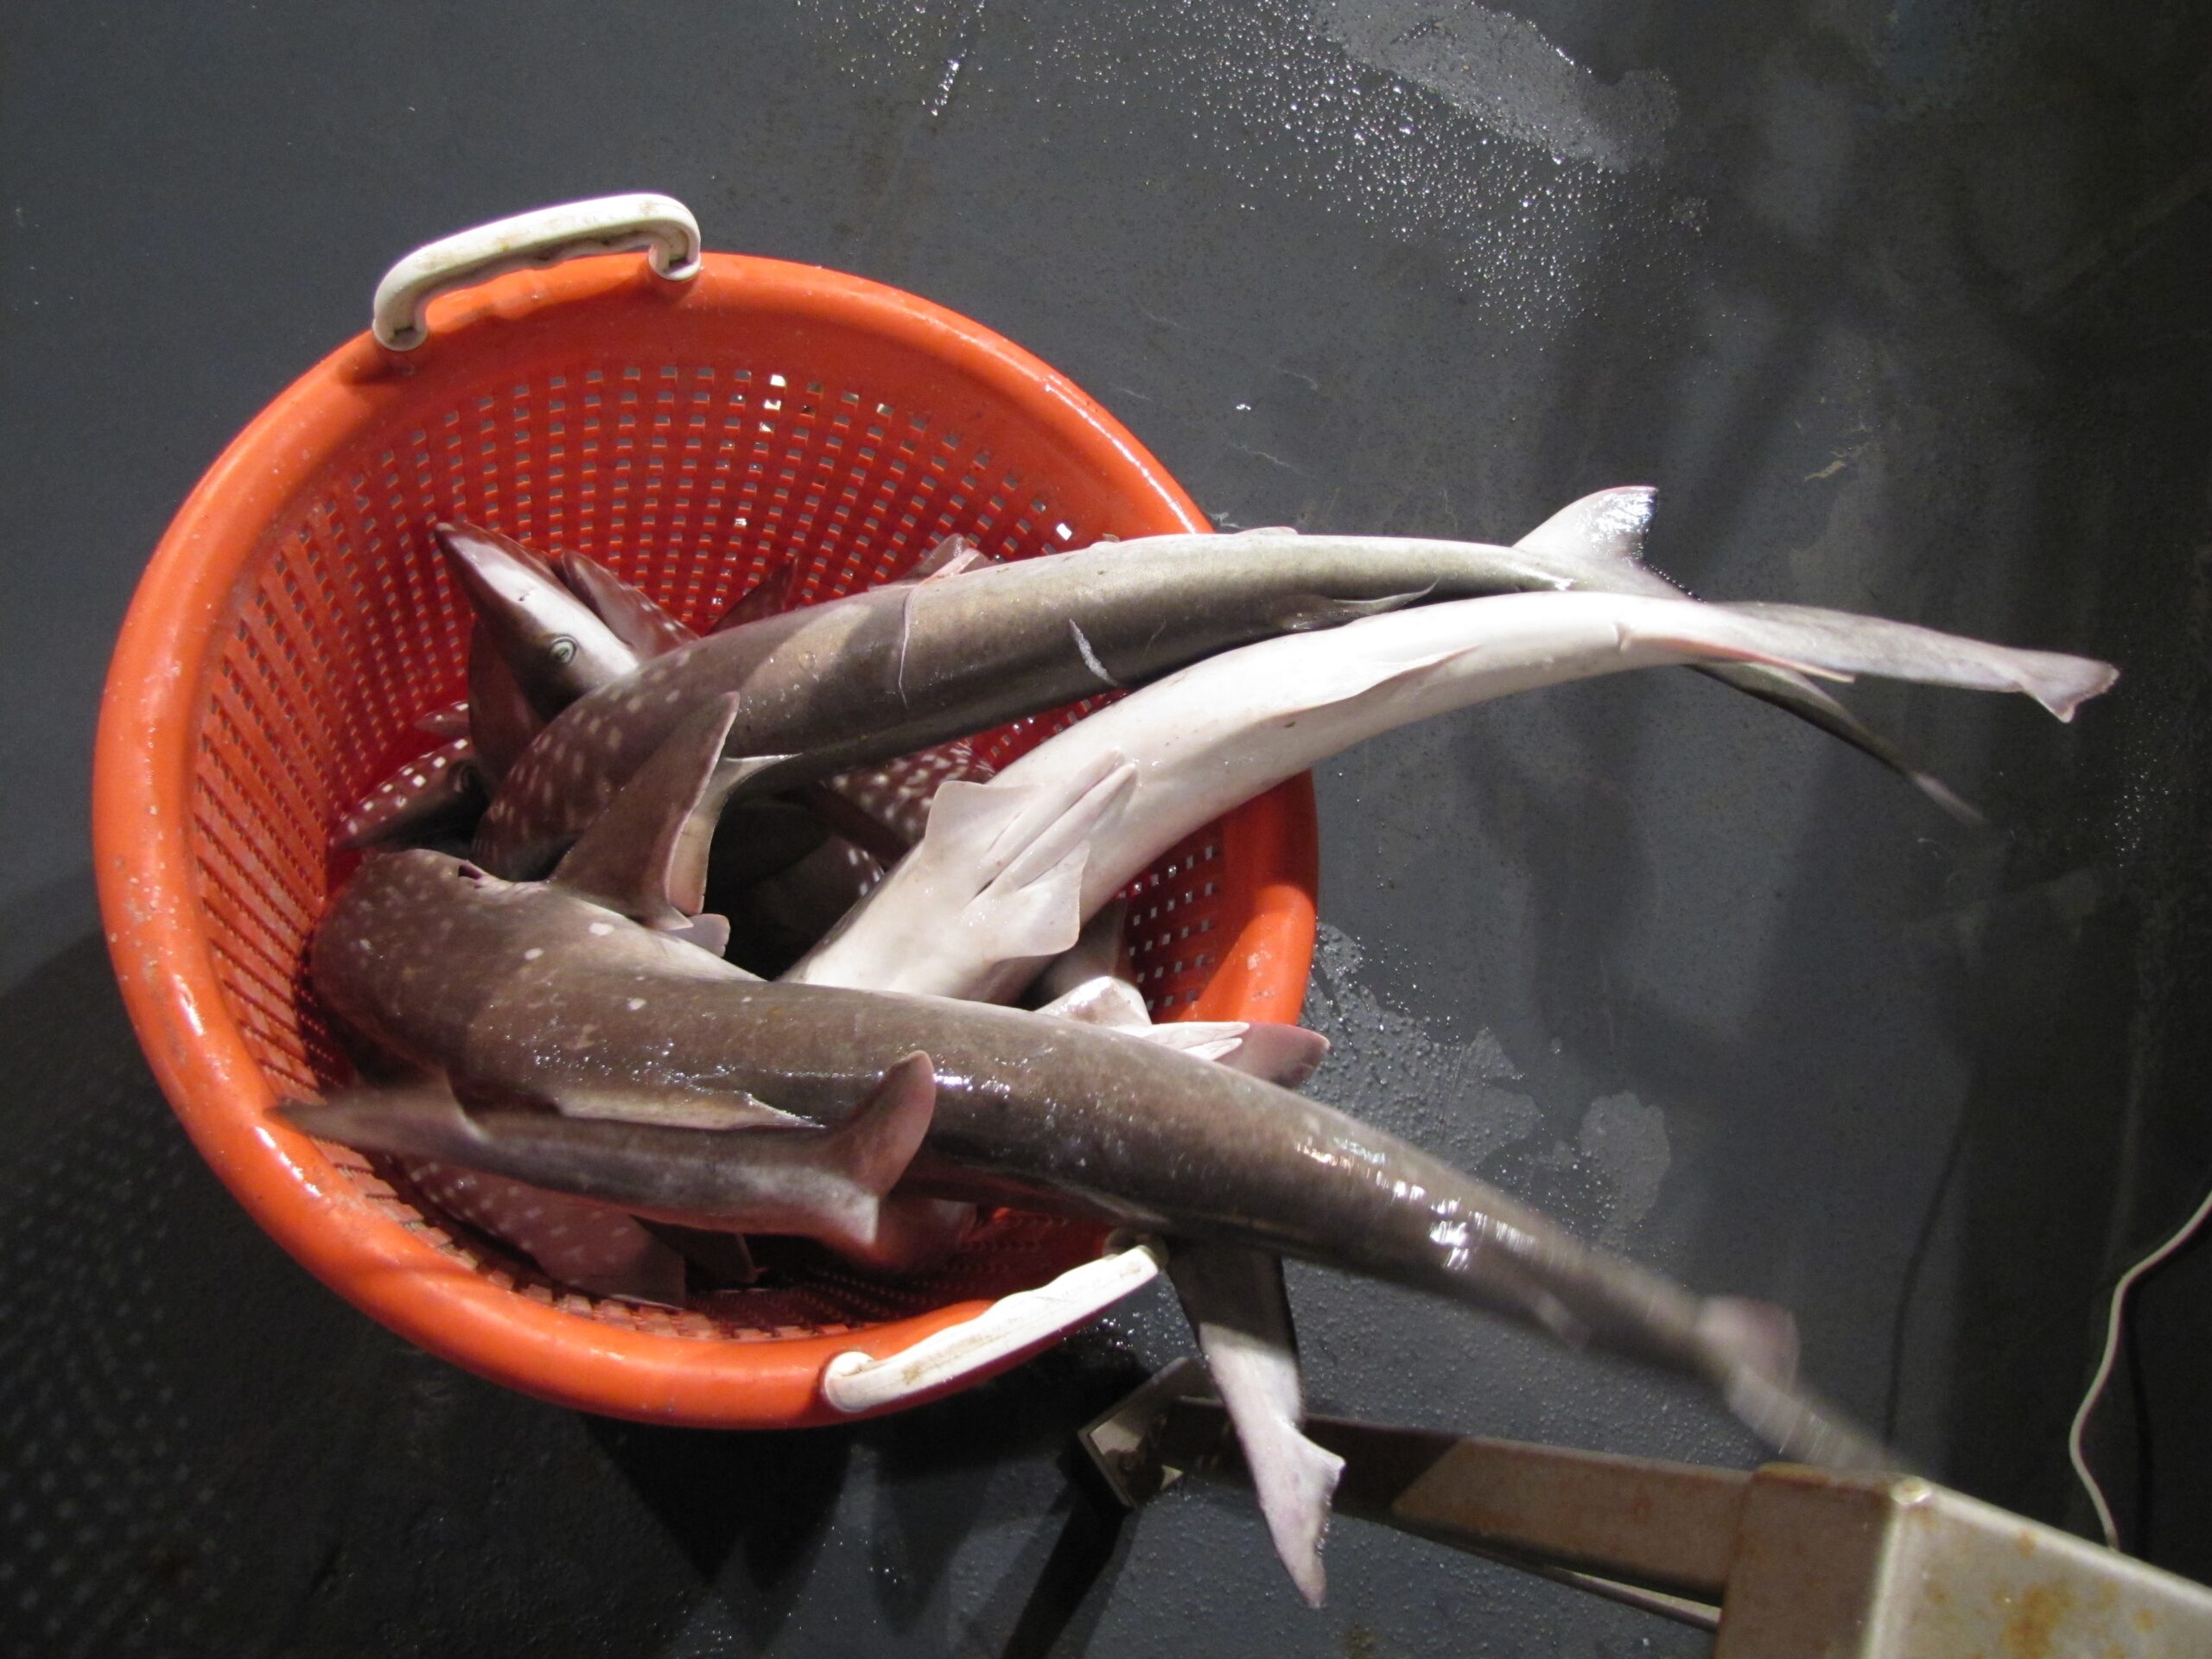 Spiny dogfish can easily jab anglers.